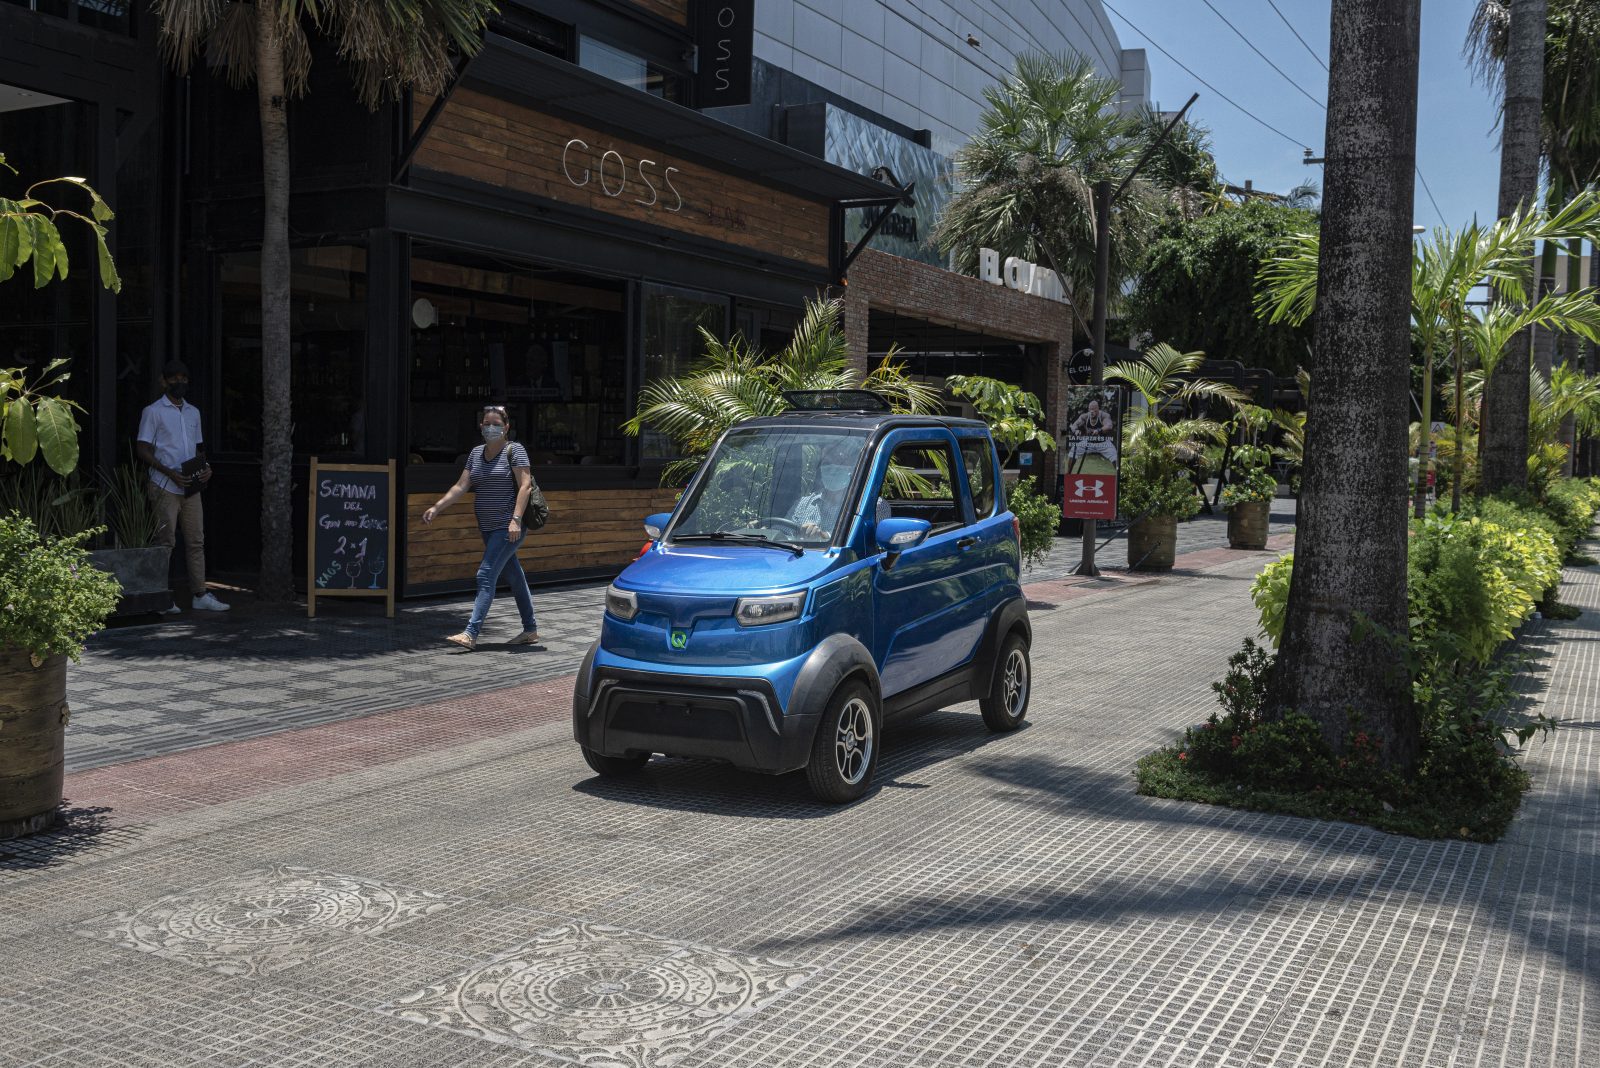 The quest to build electric vehicles in Bolivia​